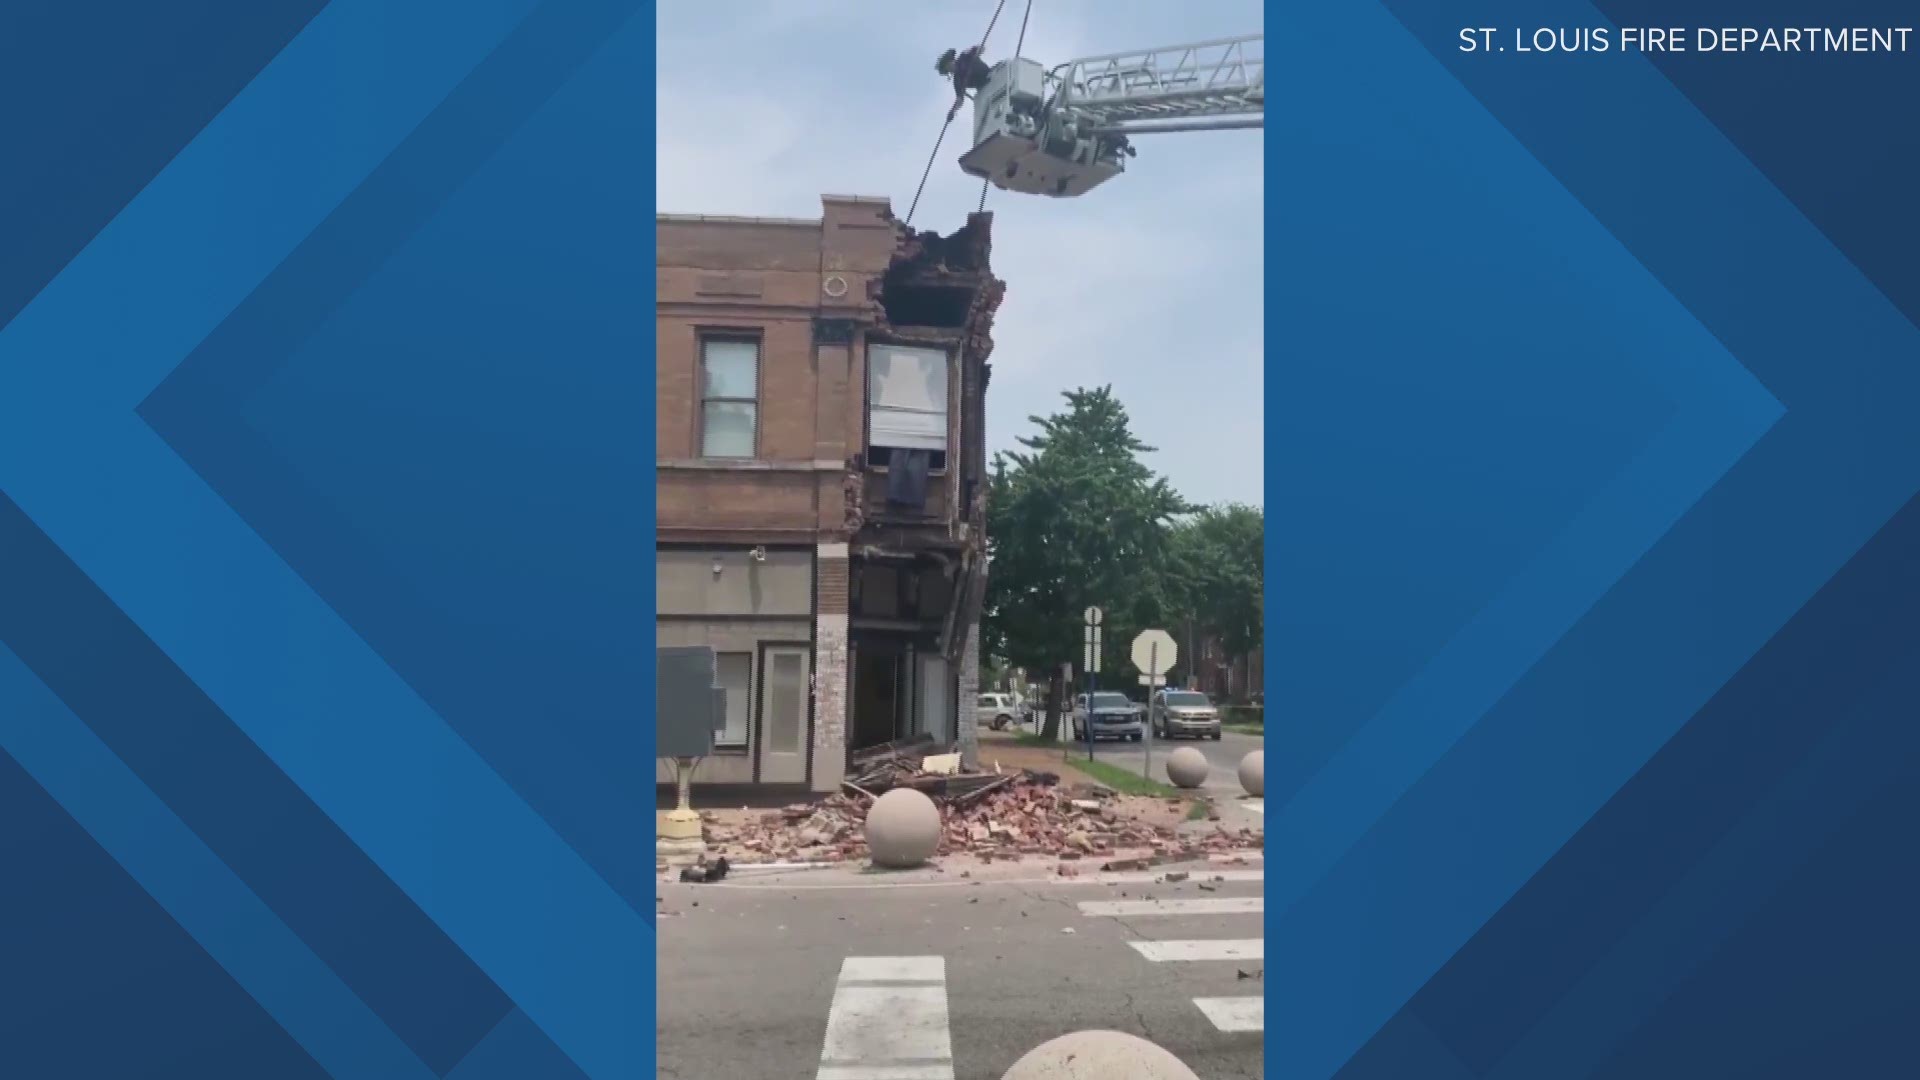 A car crashed into a building at Arsenal and Compton. The building started to collapse onto the car. After the car was removed, firefighters knocked bricks loose.